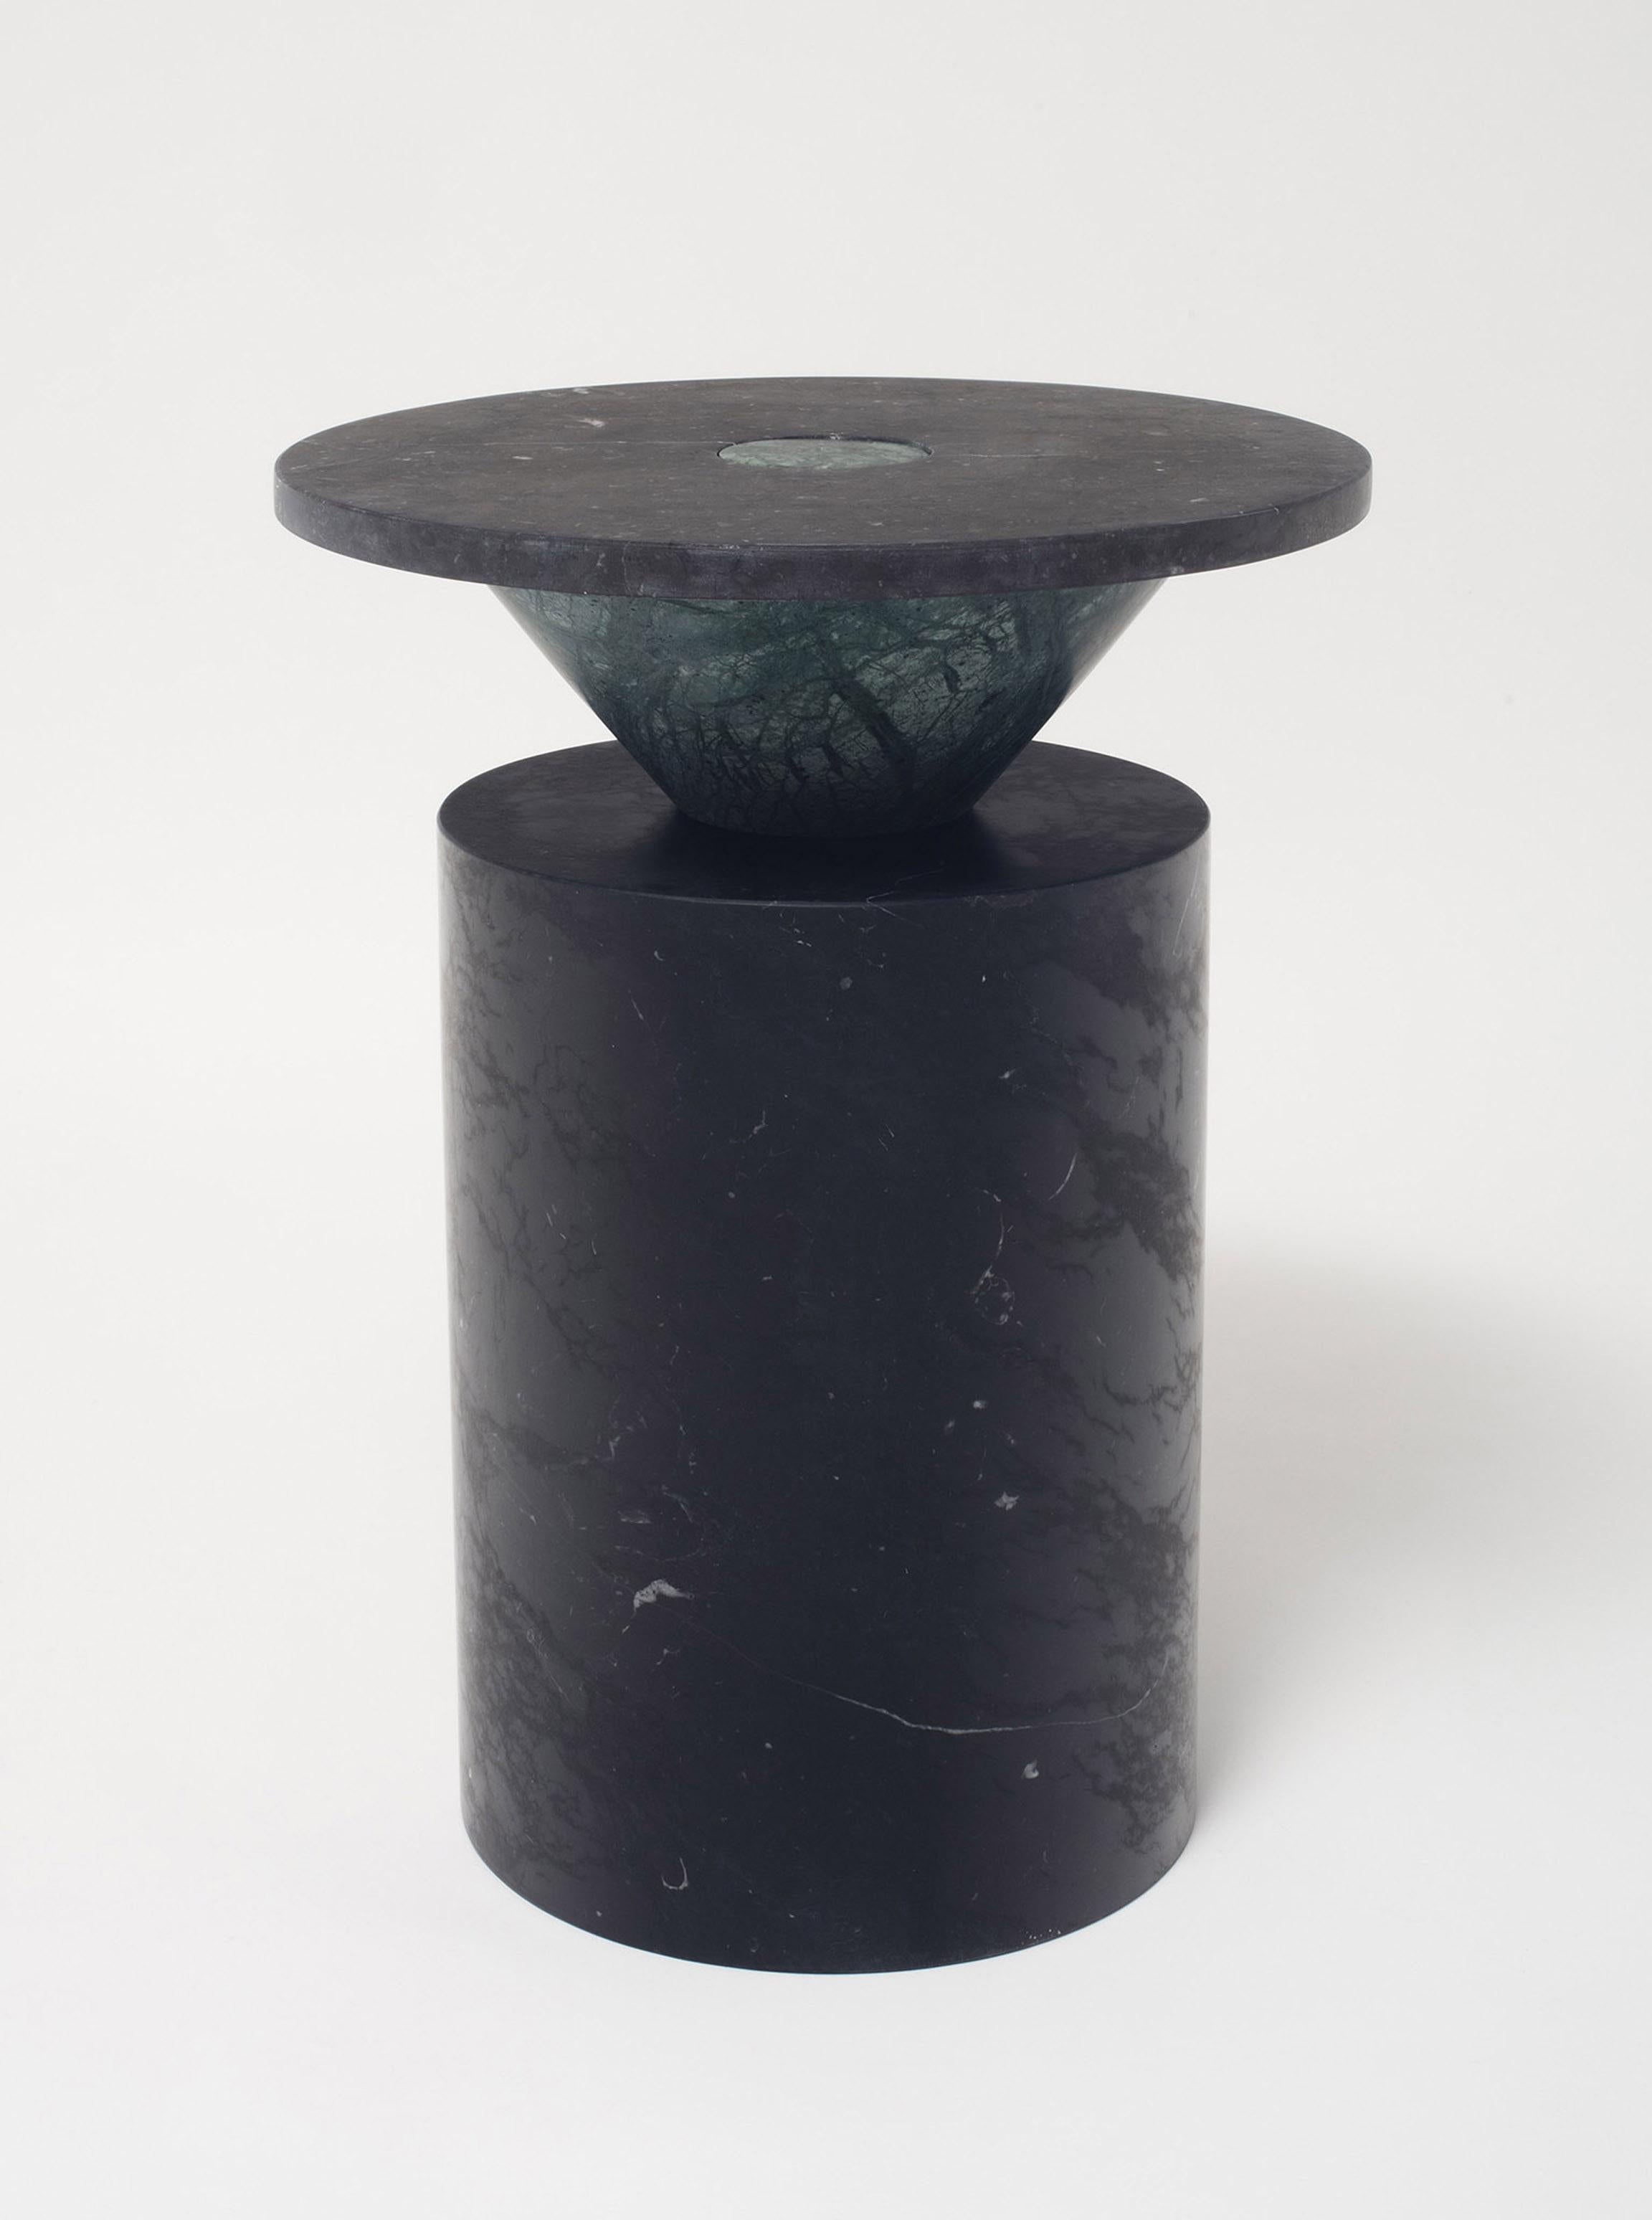 Black Totem coffee table, limited edition by Karen Chekerdjian
Dimensions: 42 x 42 x 62 cm
Materials: Nero Marquinia, Verde Imperiale

Karen’s trajectory into designing was unsystematic, comprised of a combination of practical experience in